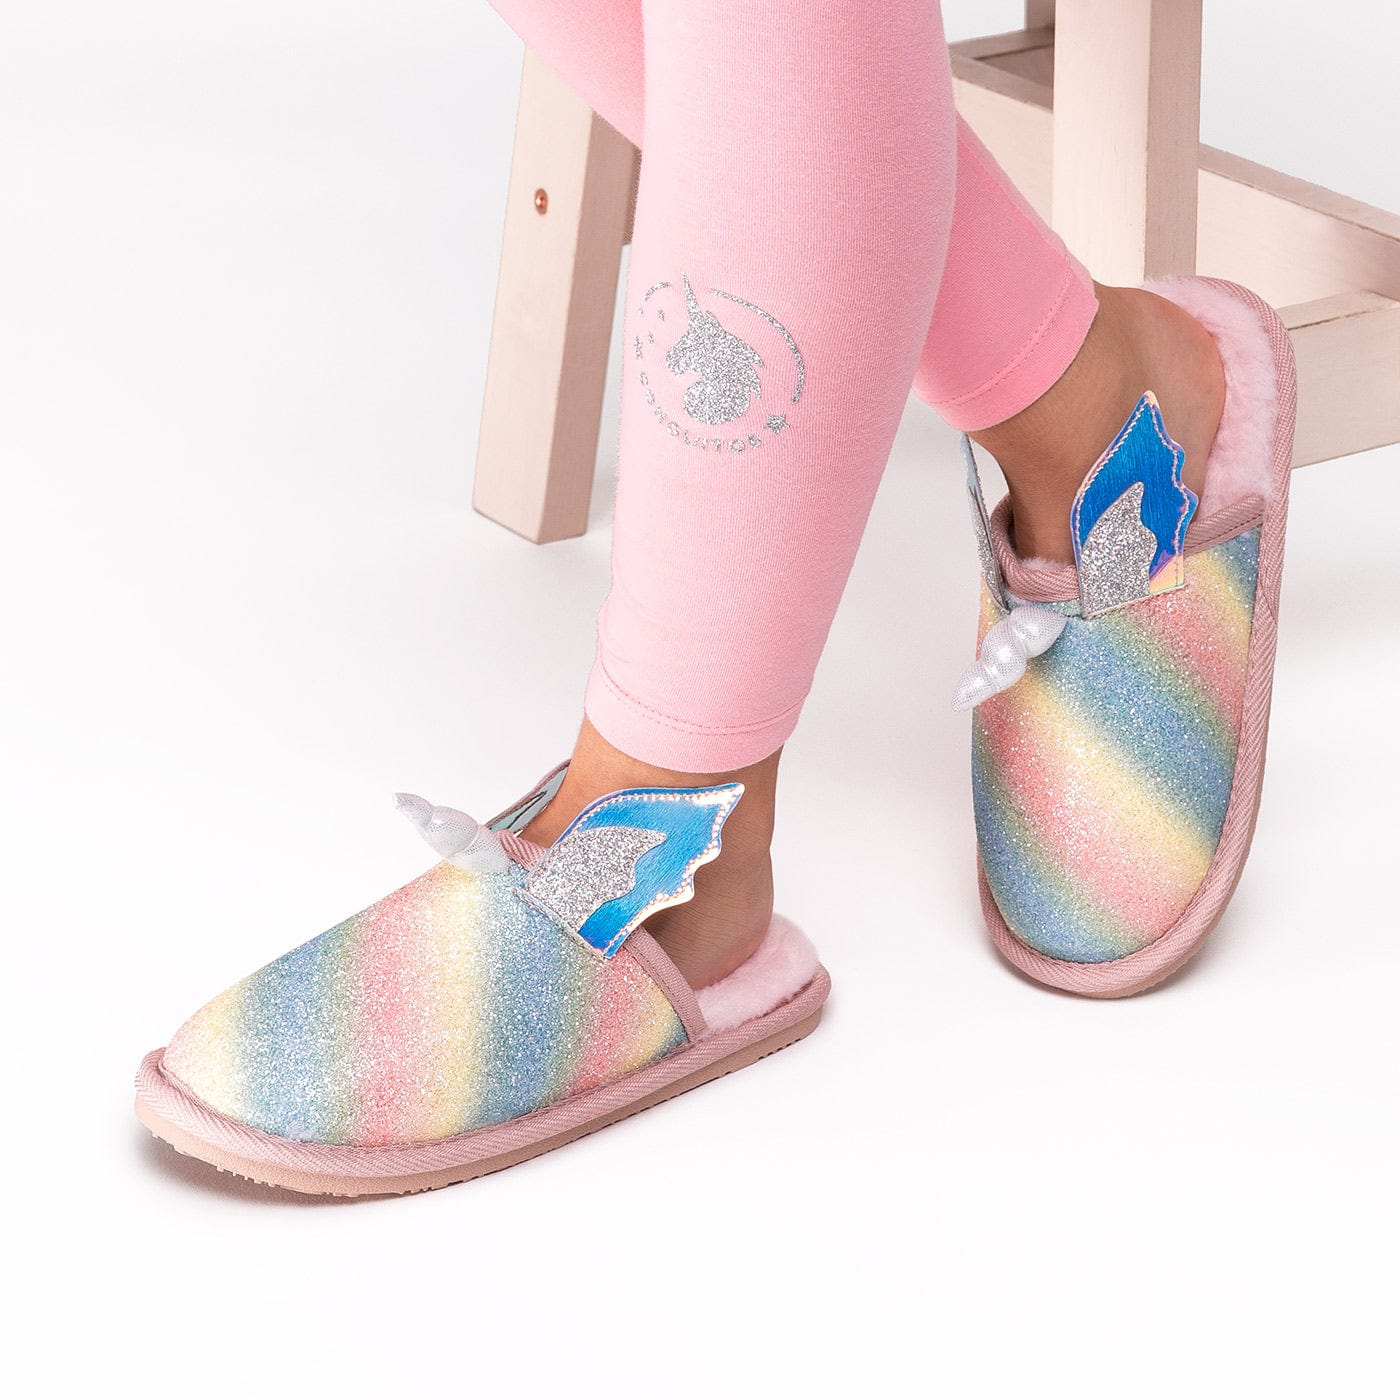 CONGUITOS Shoes Unicorn Home Slippers